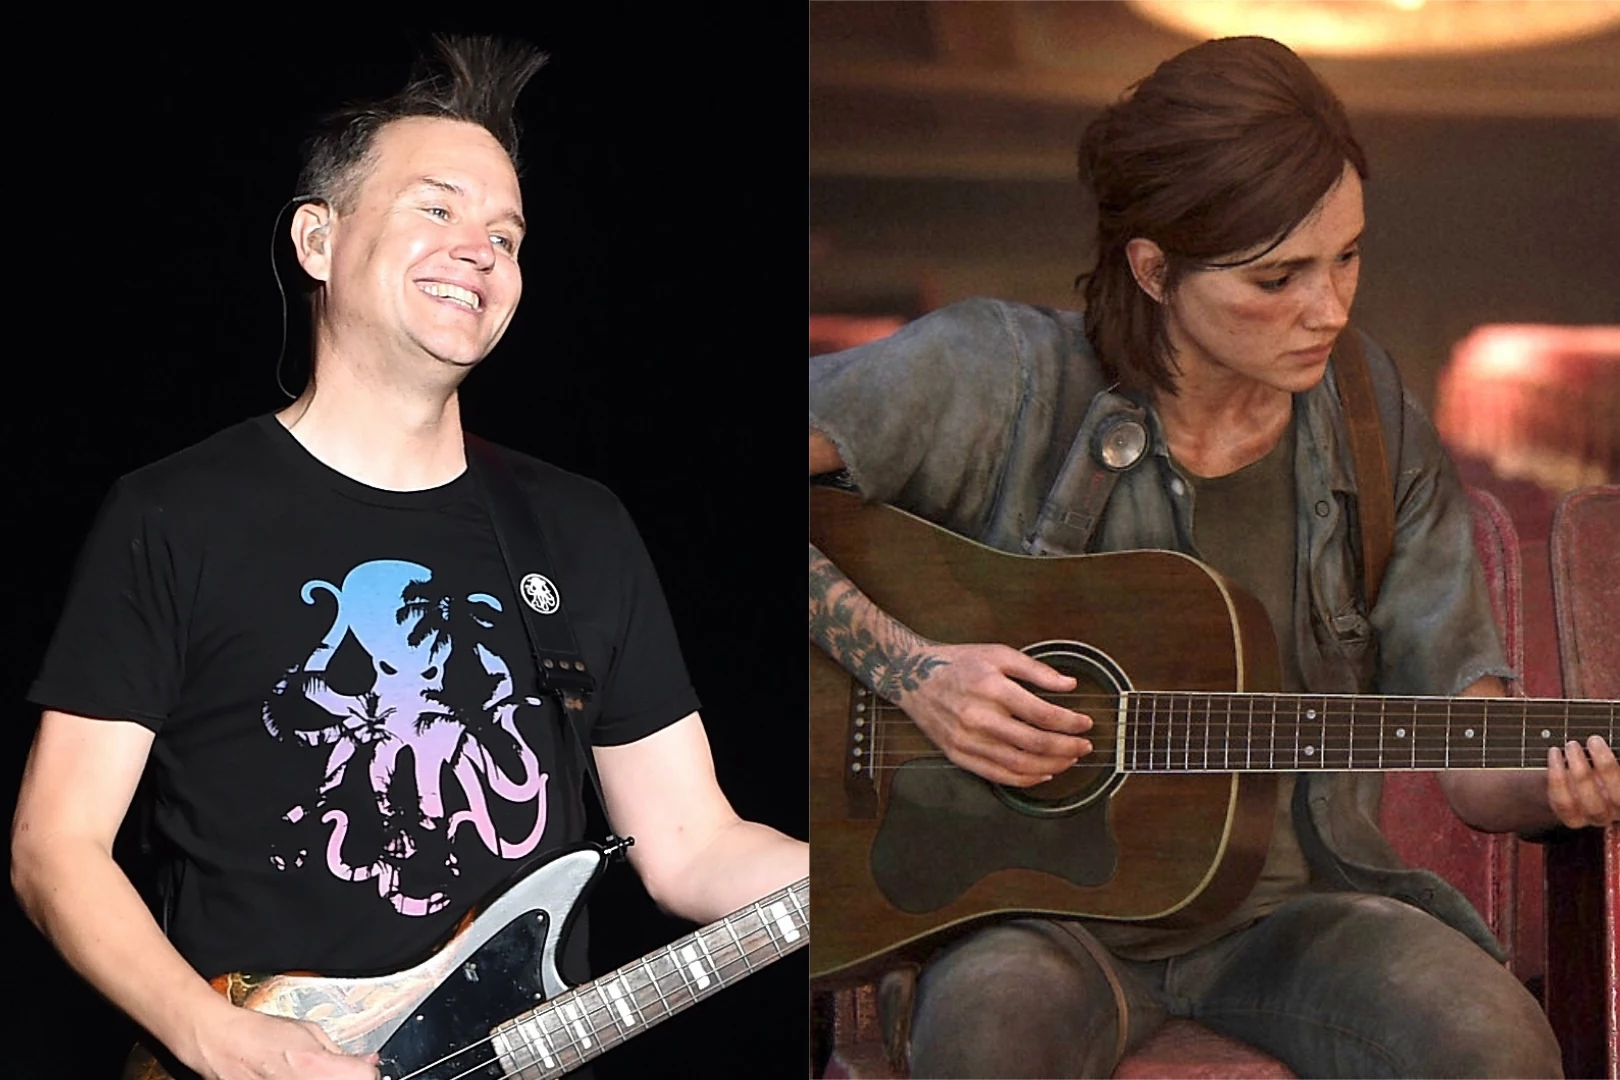 Mark From Blink-182 Plays Dammit in PS4s Last of Us Part image image